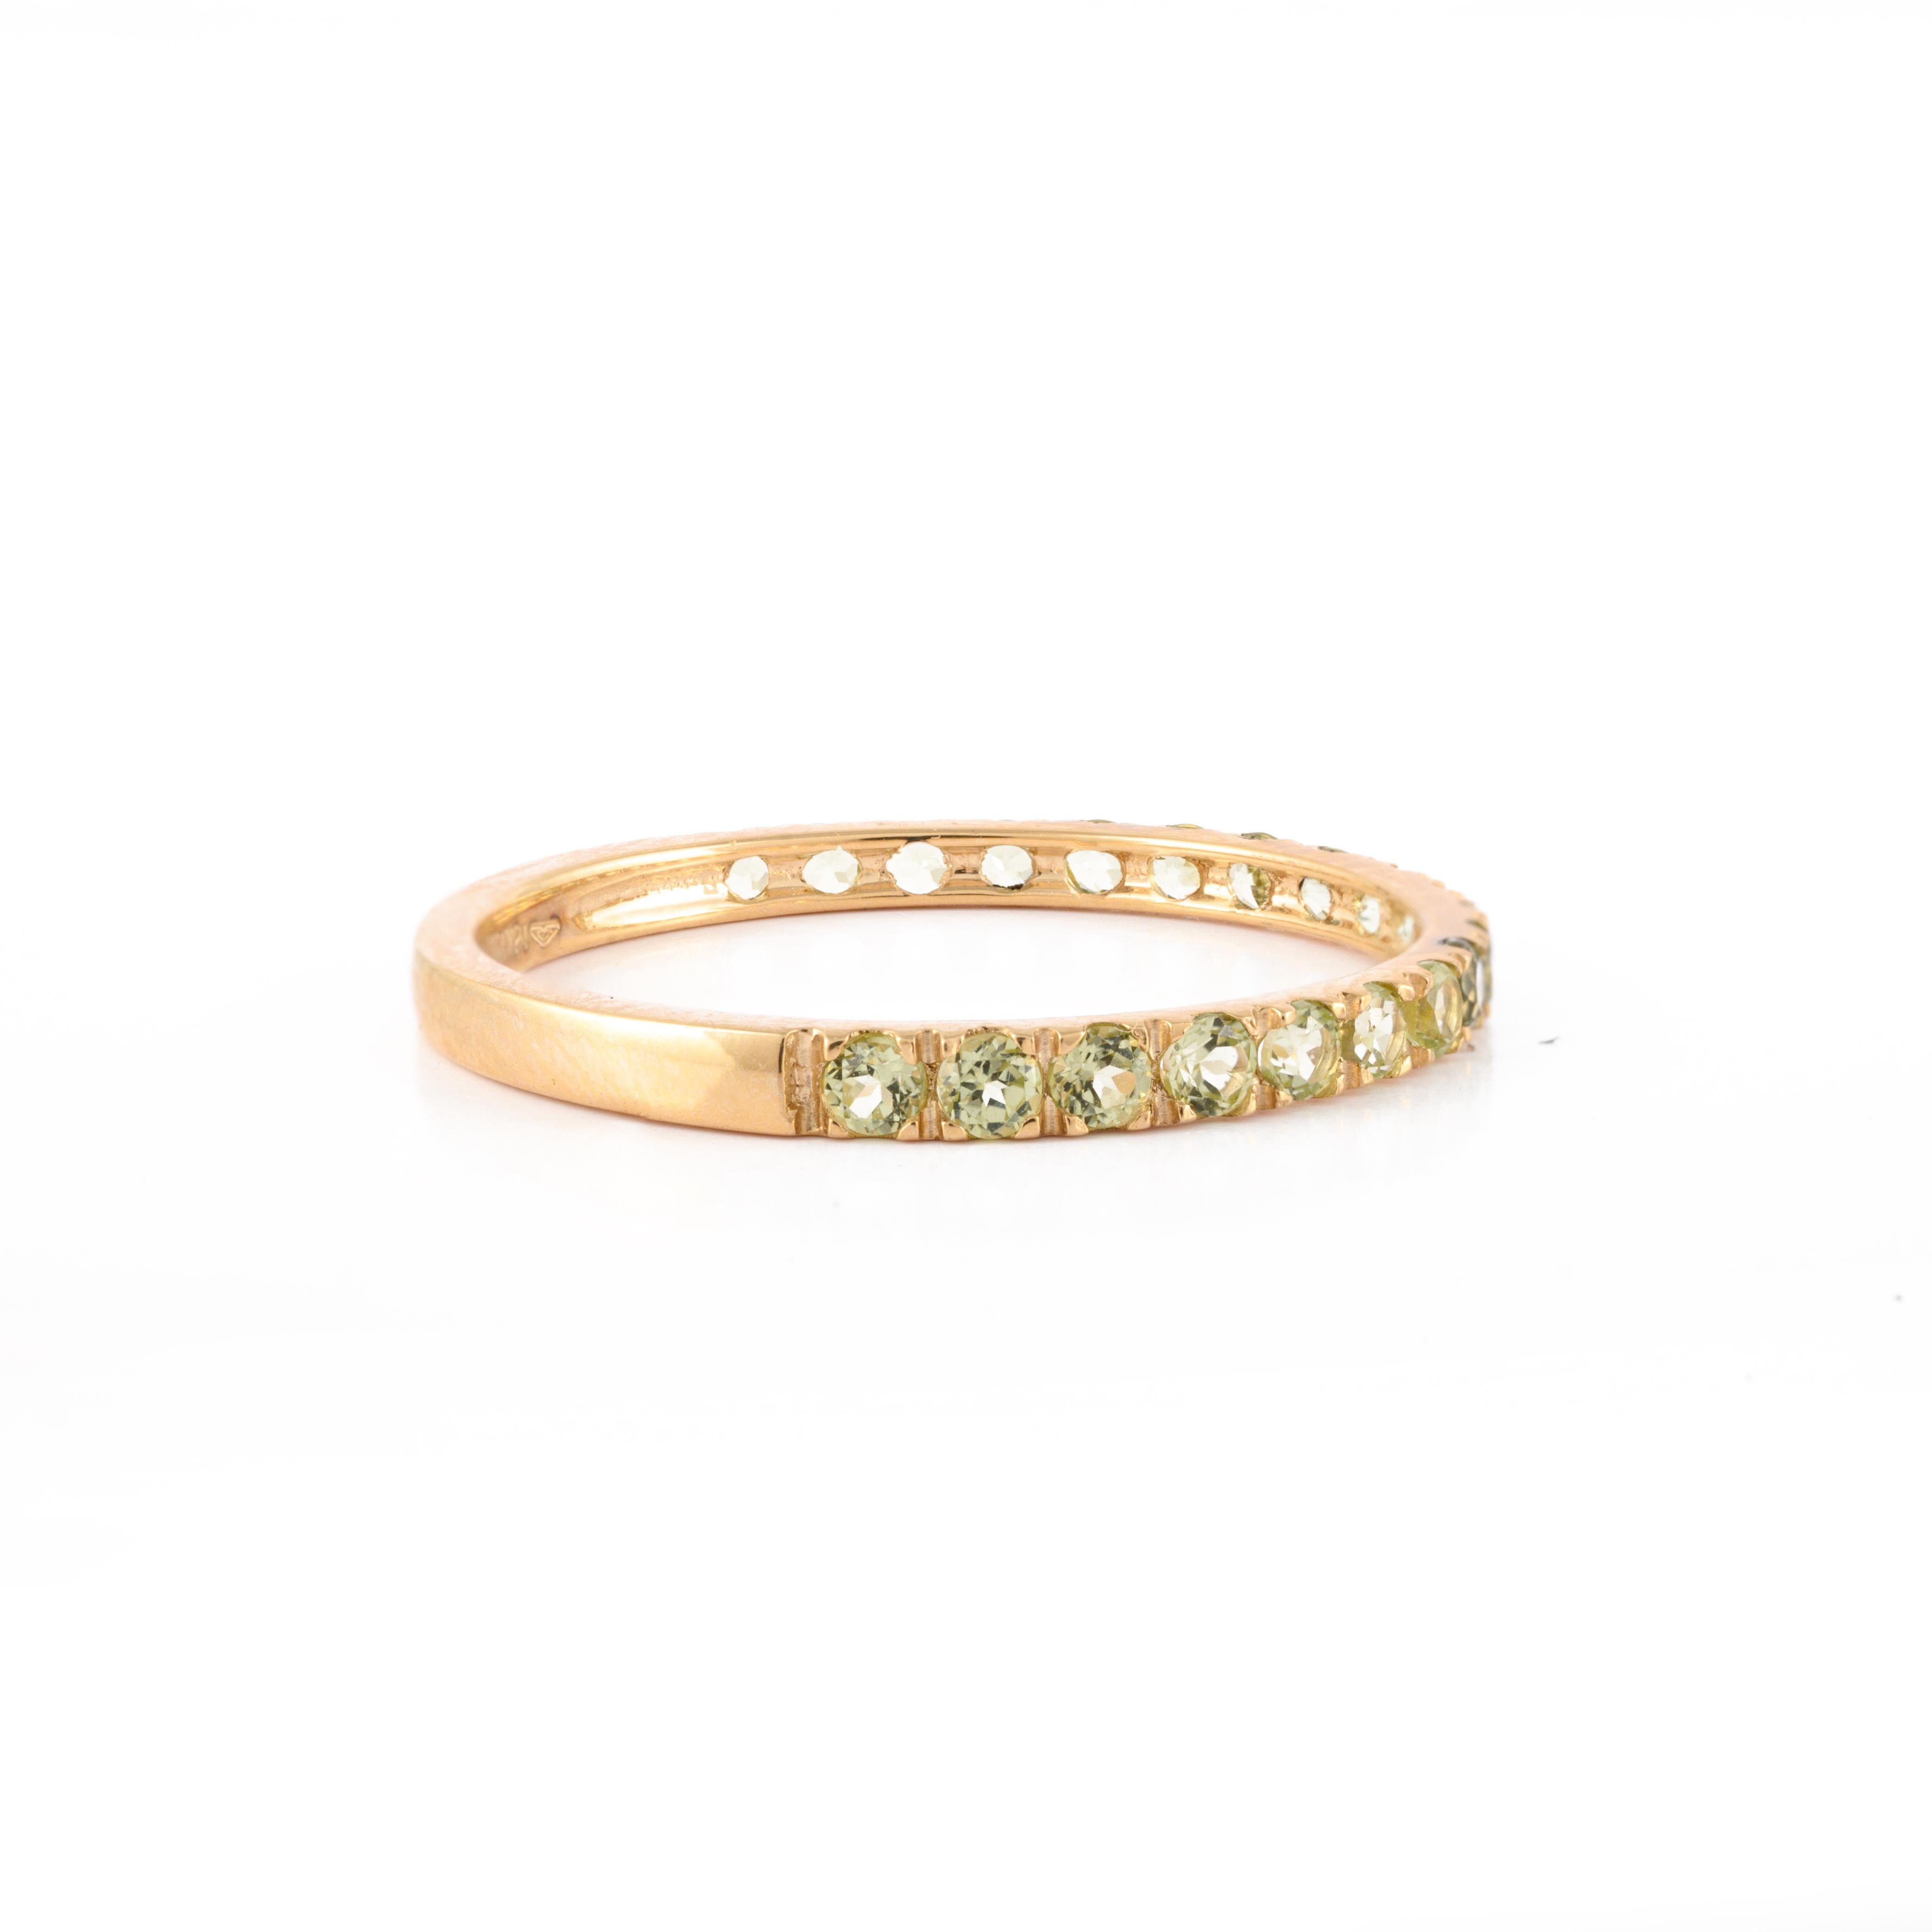 For Sale:  Peridot Pave Eternity Band, Stackable Peridot Band Ring 14k Solid Yellow Gold 6